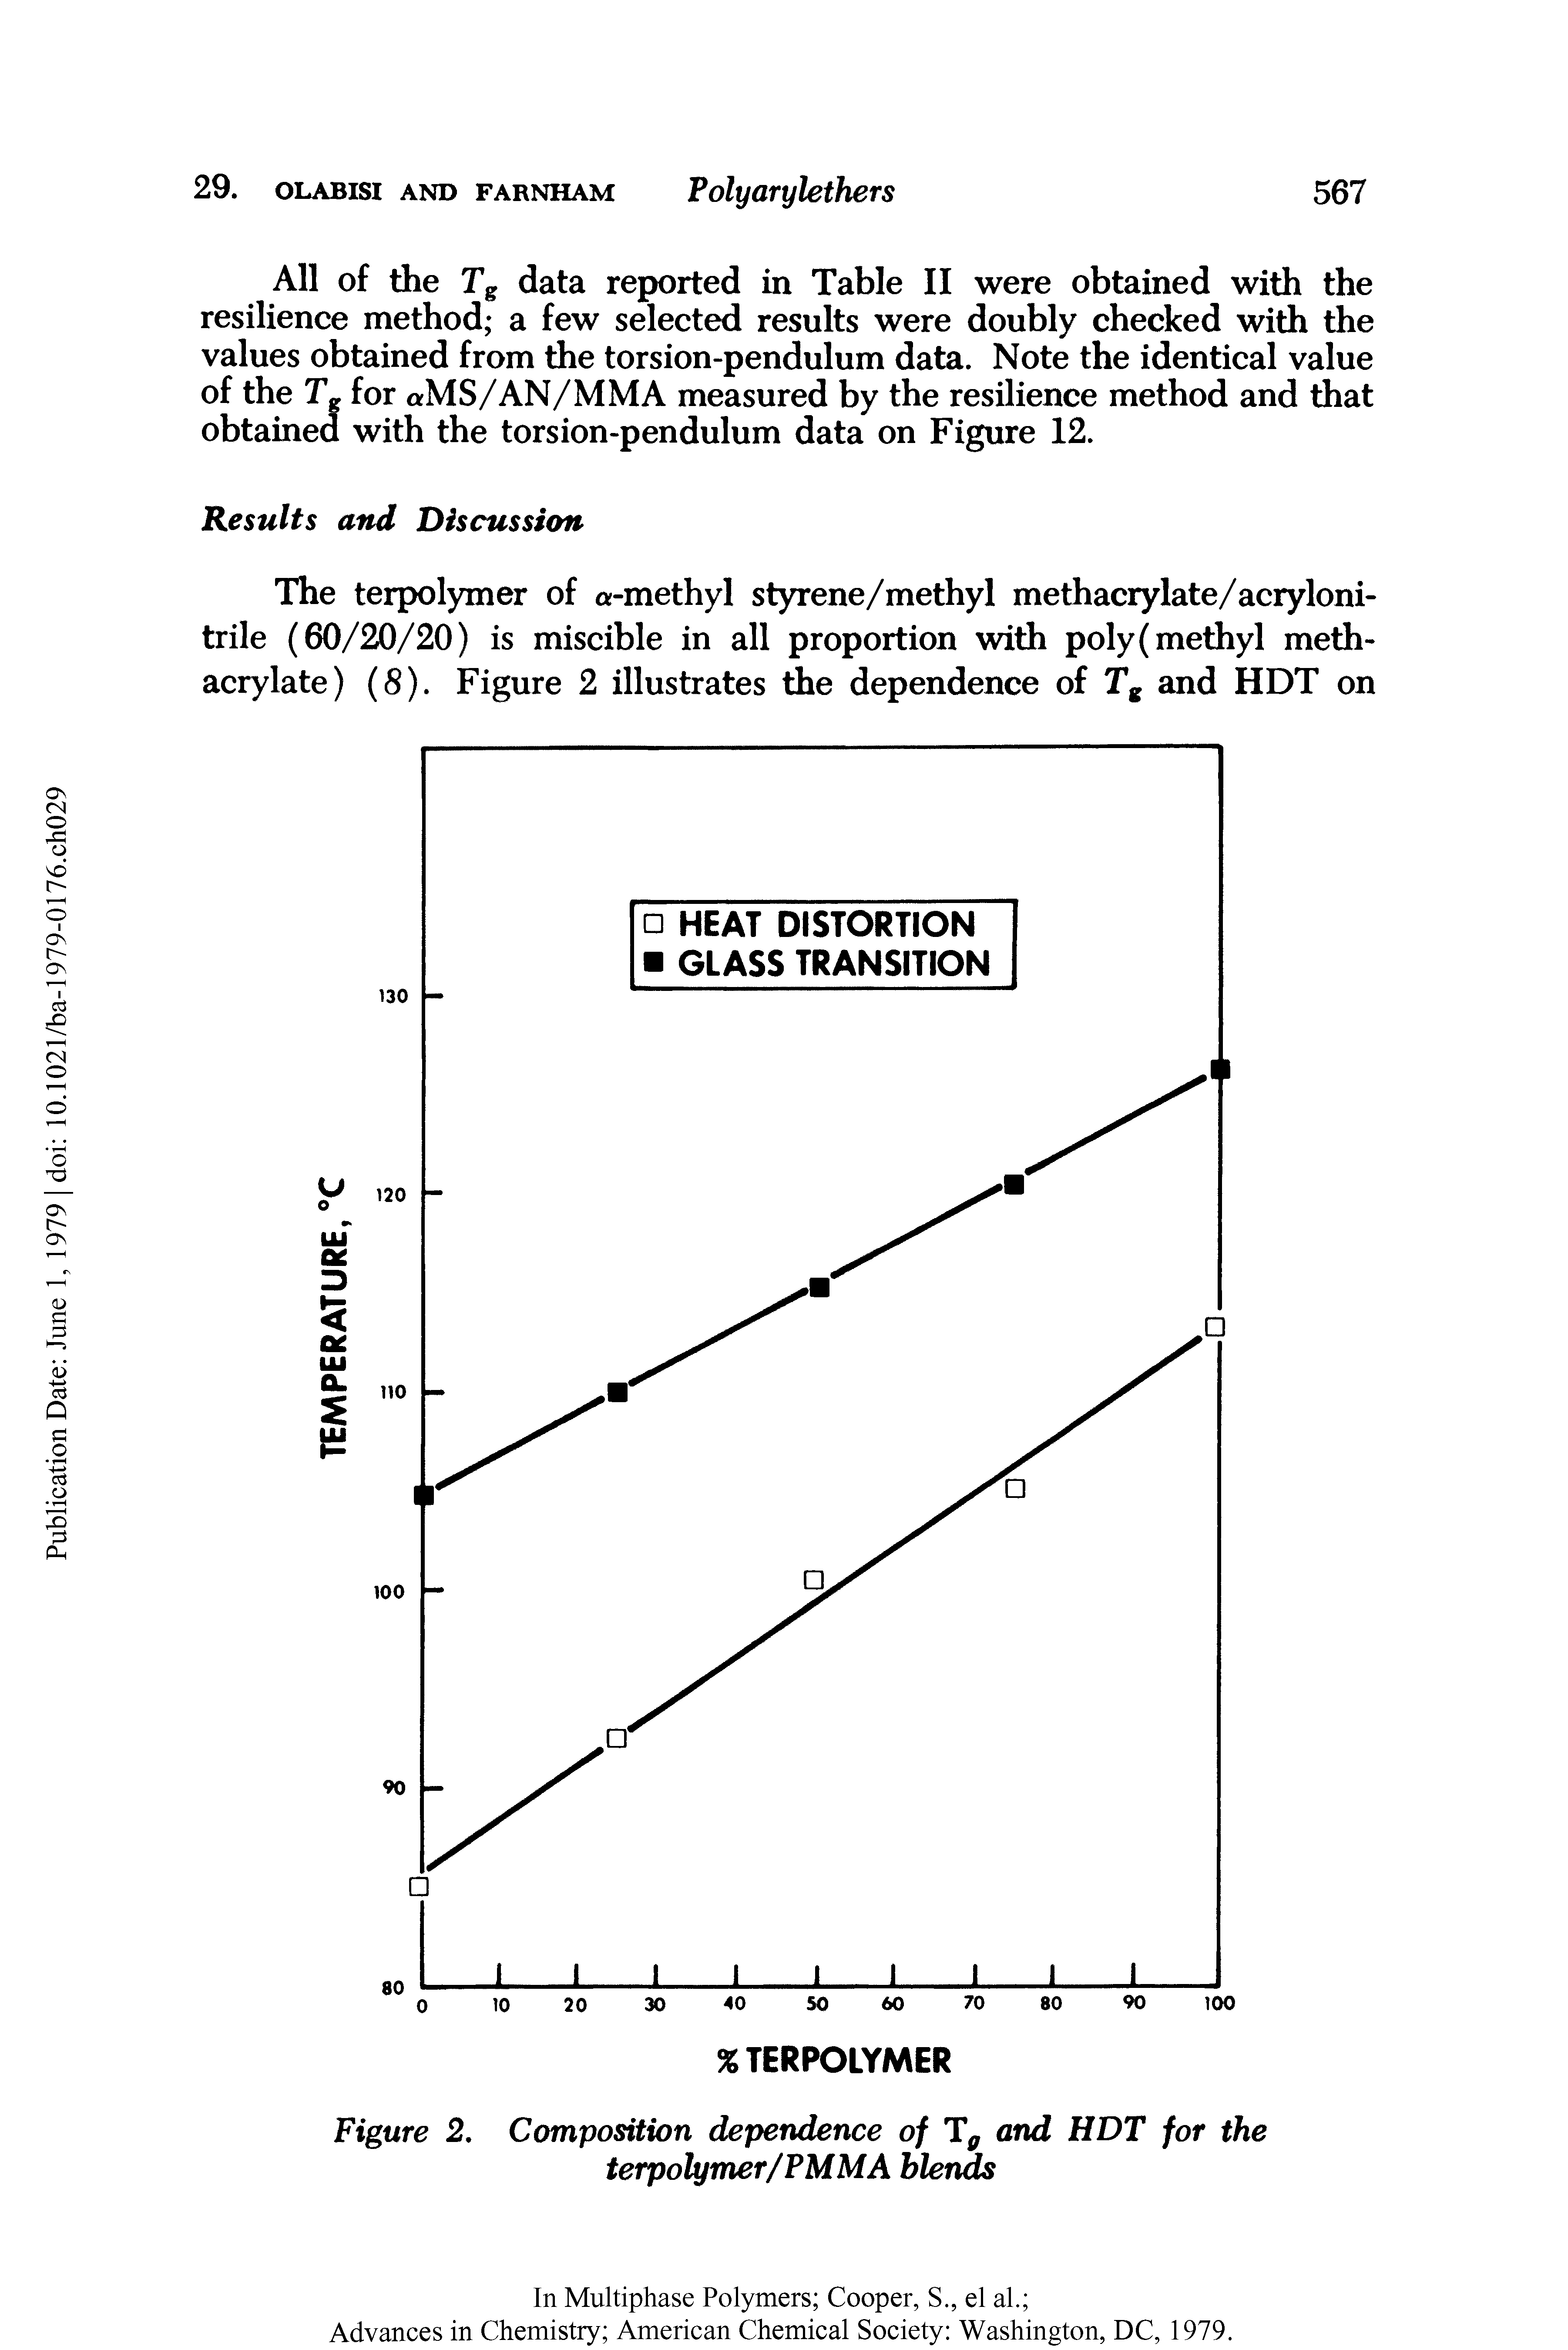 Figure 2. Composition dependence of Tg and HDT for the terpolymer/PMMA blends...